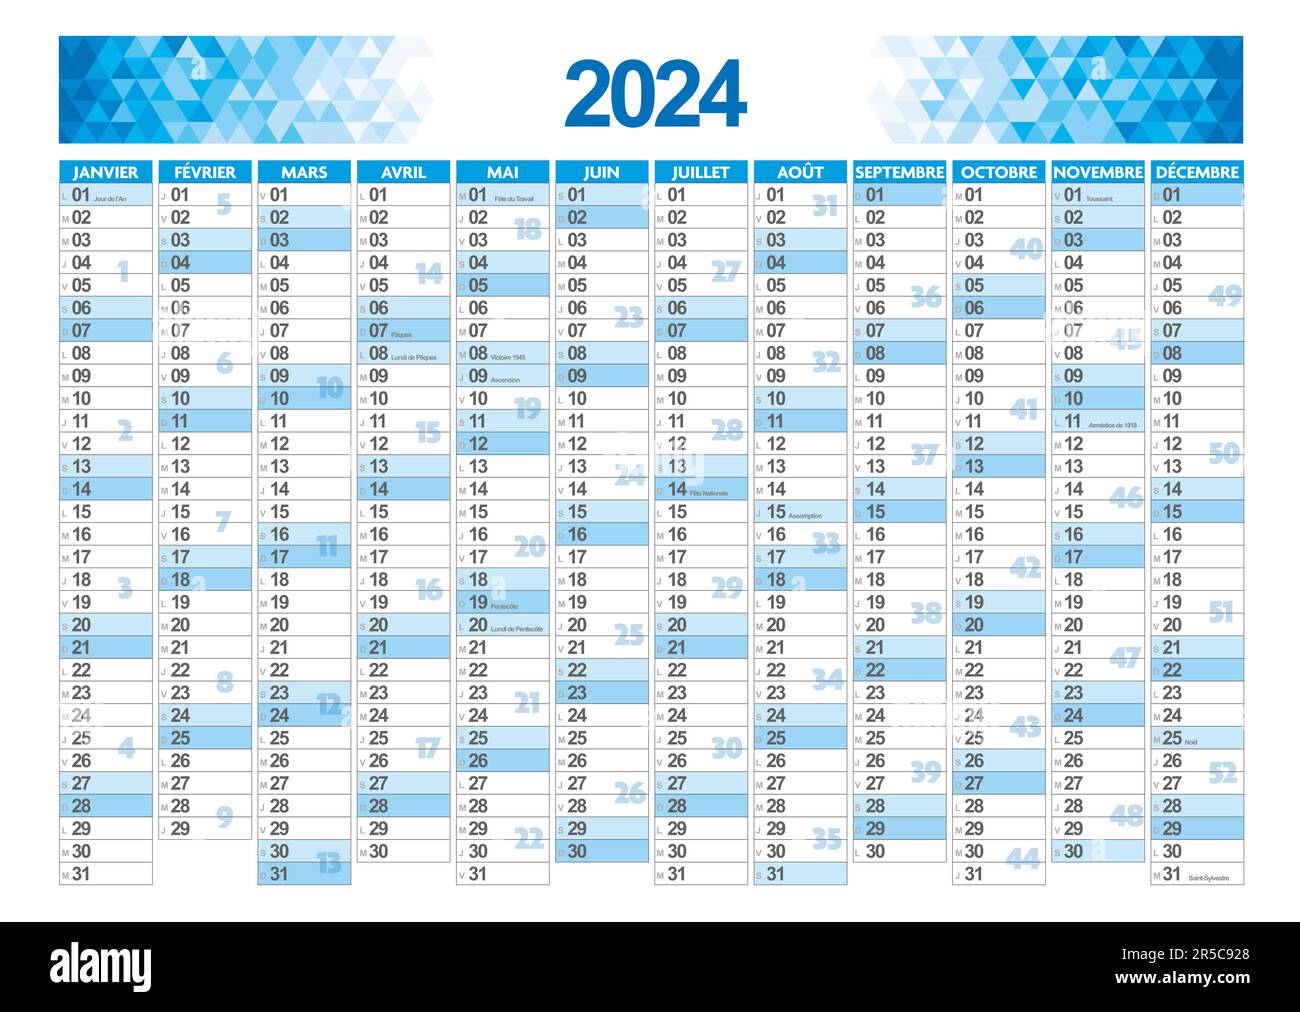 Above - Calendriers 2024